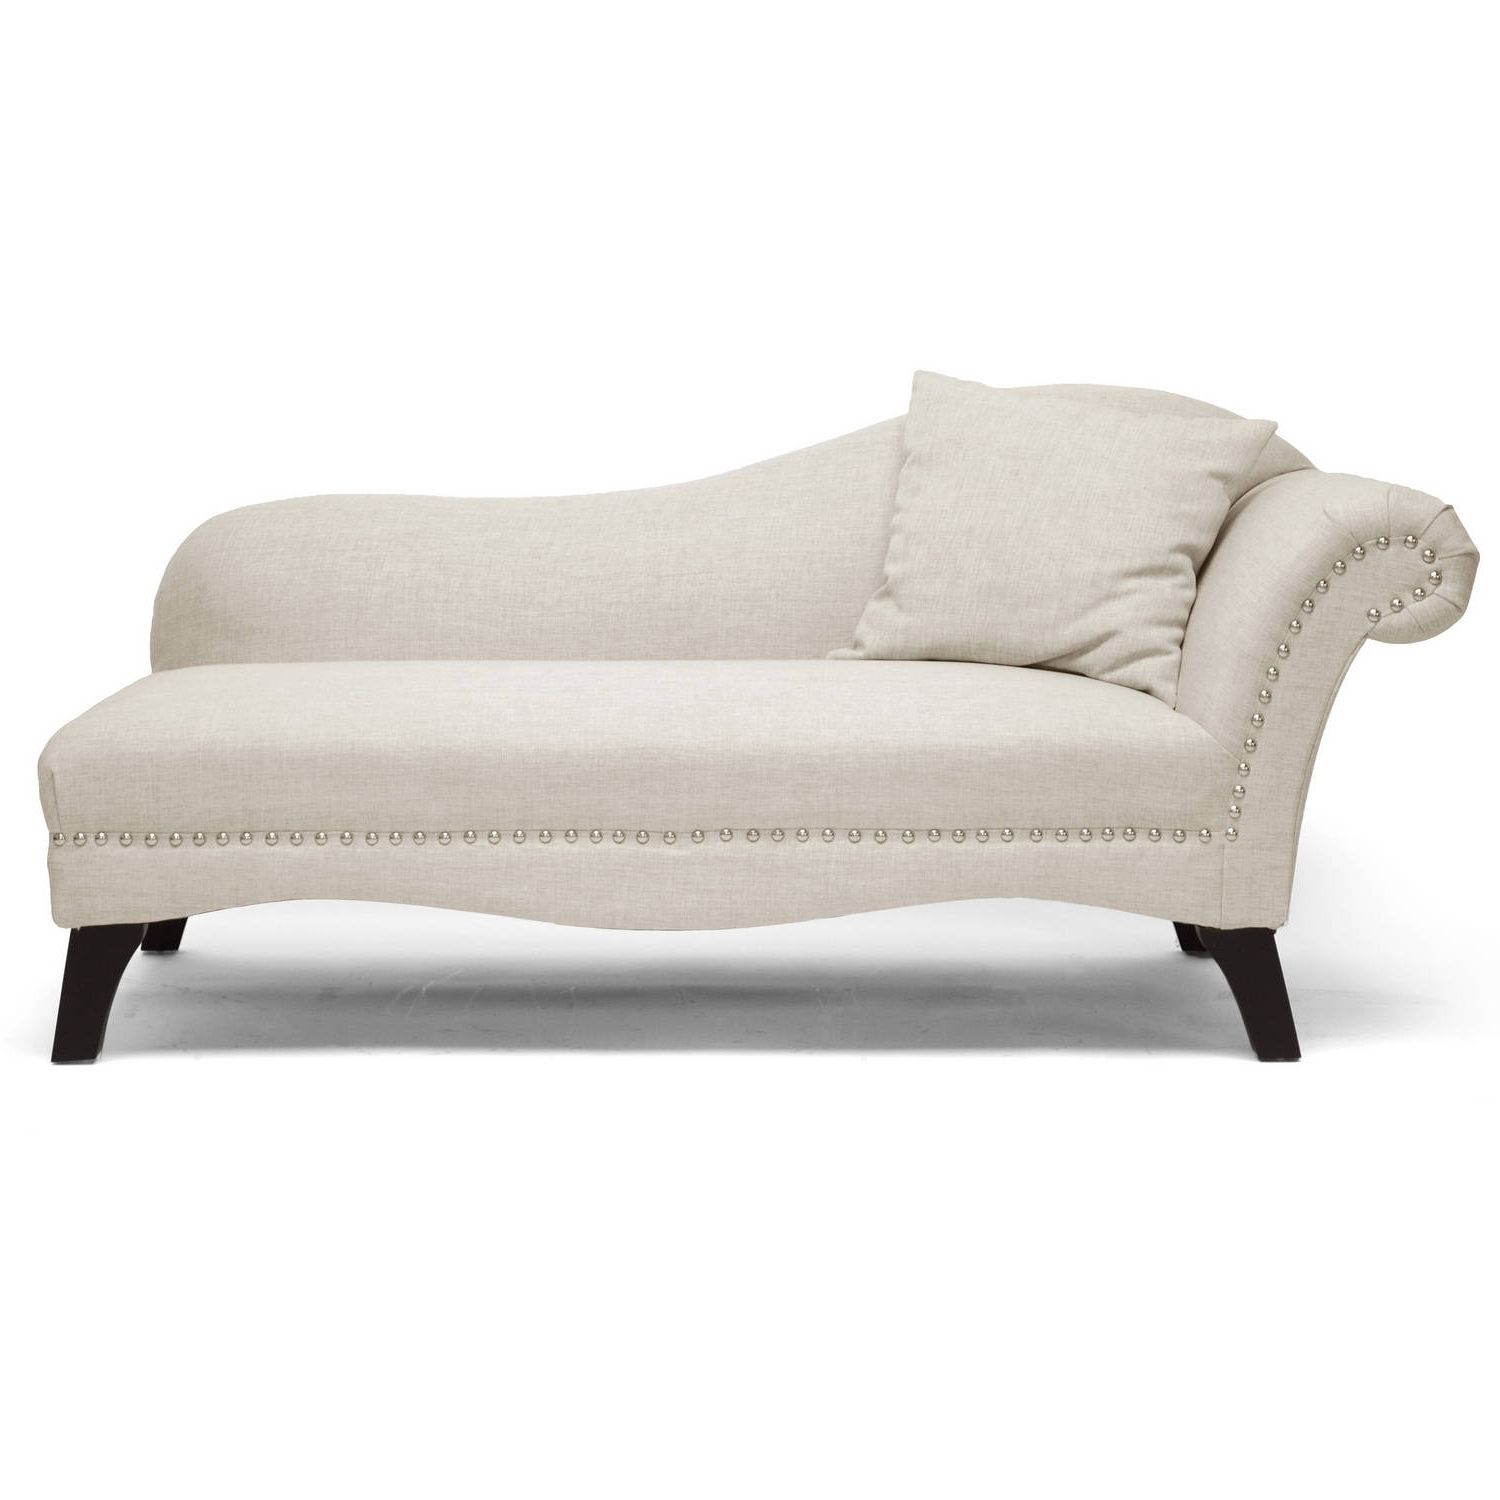 Current Chaise Lounges – Walmart Inside Small Chaises (View 12 of 15)